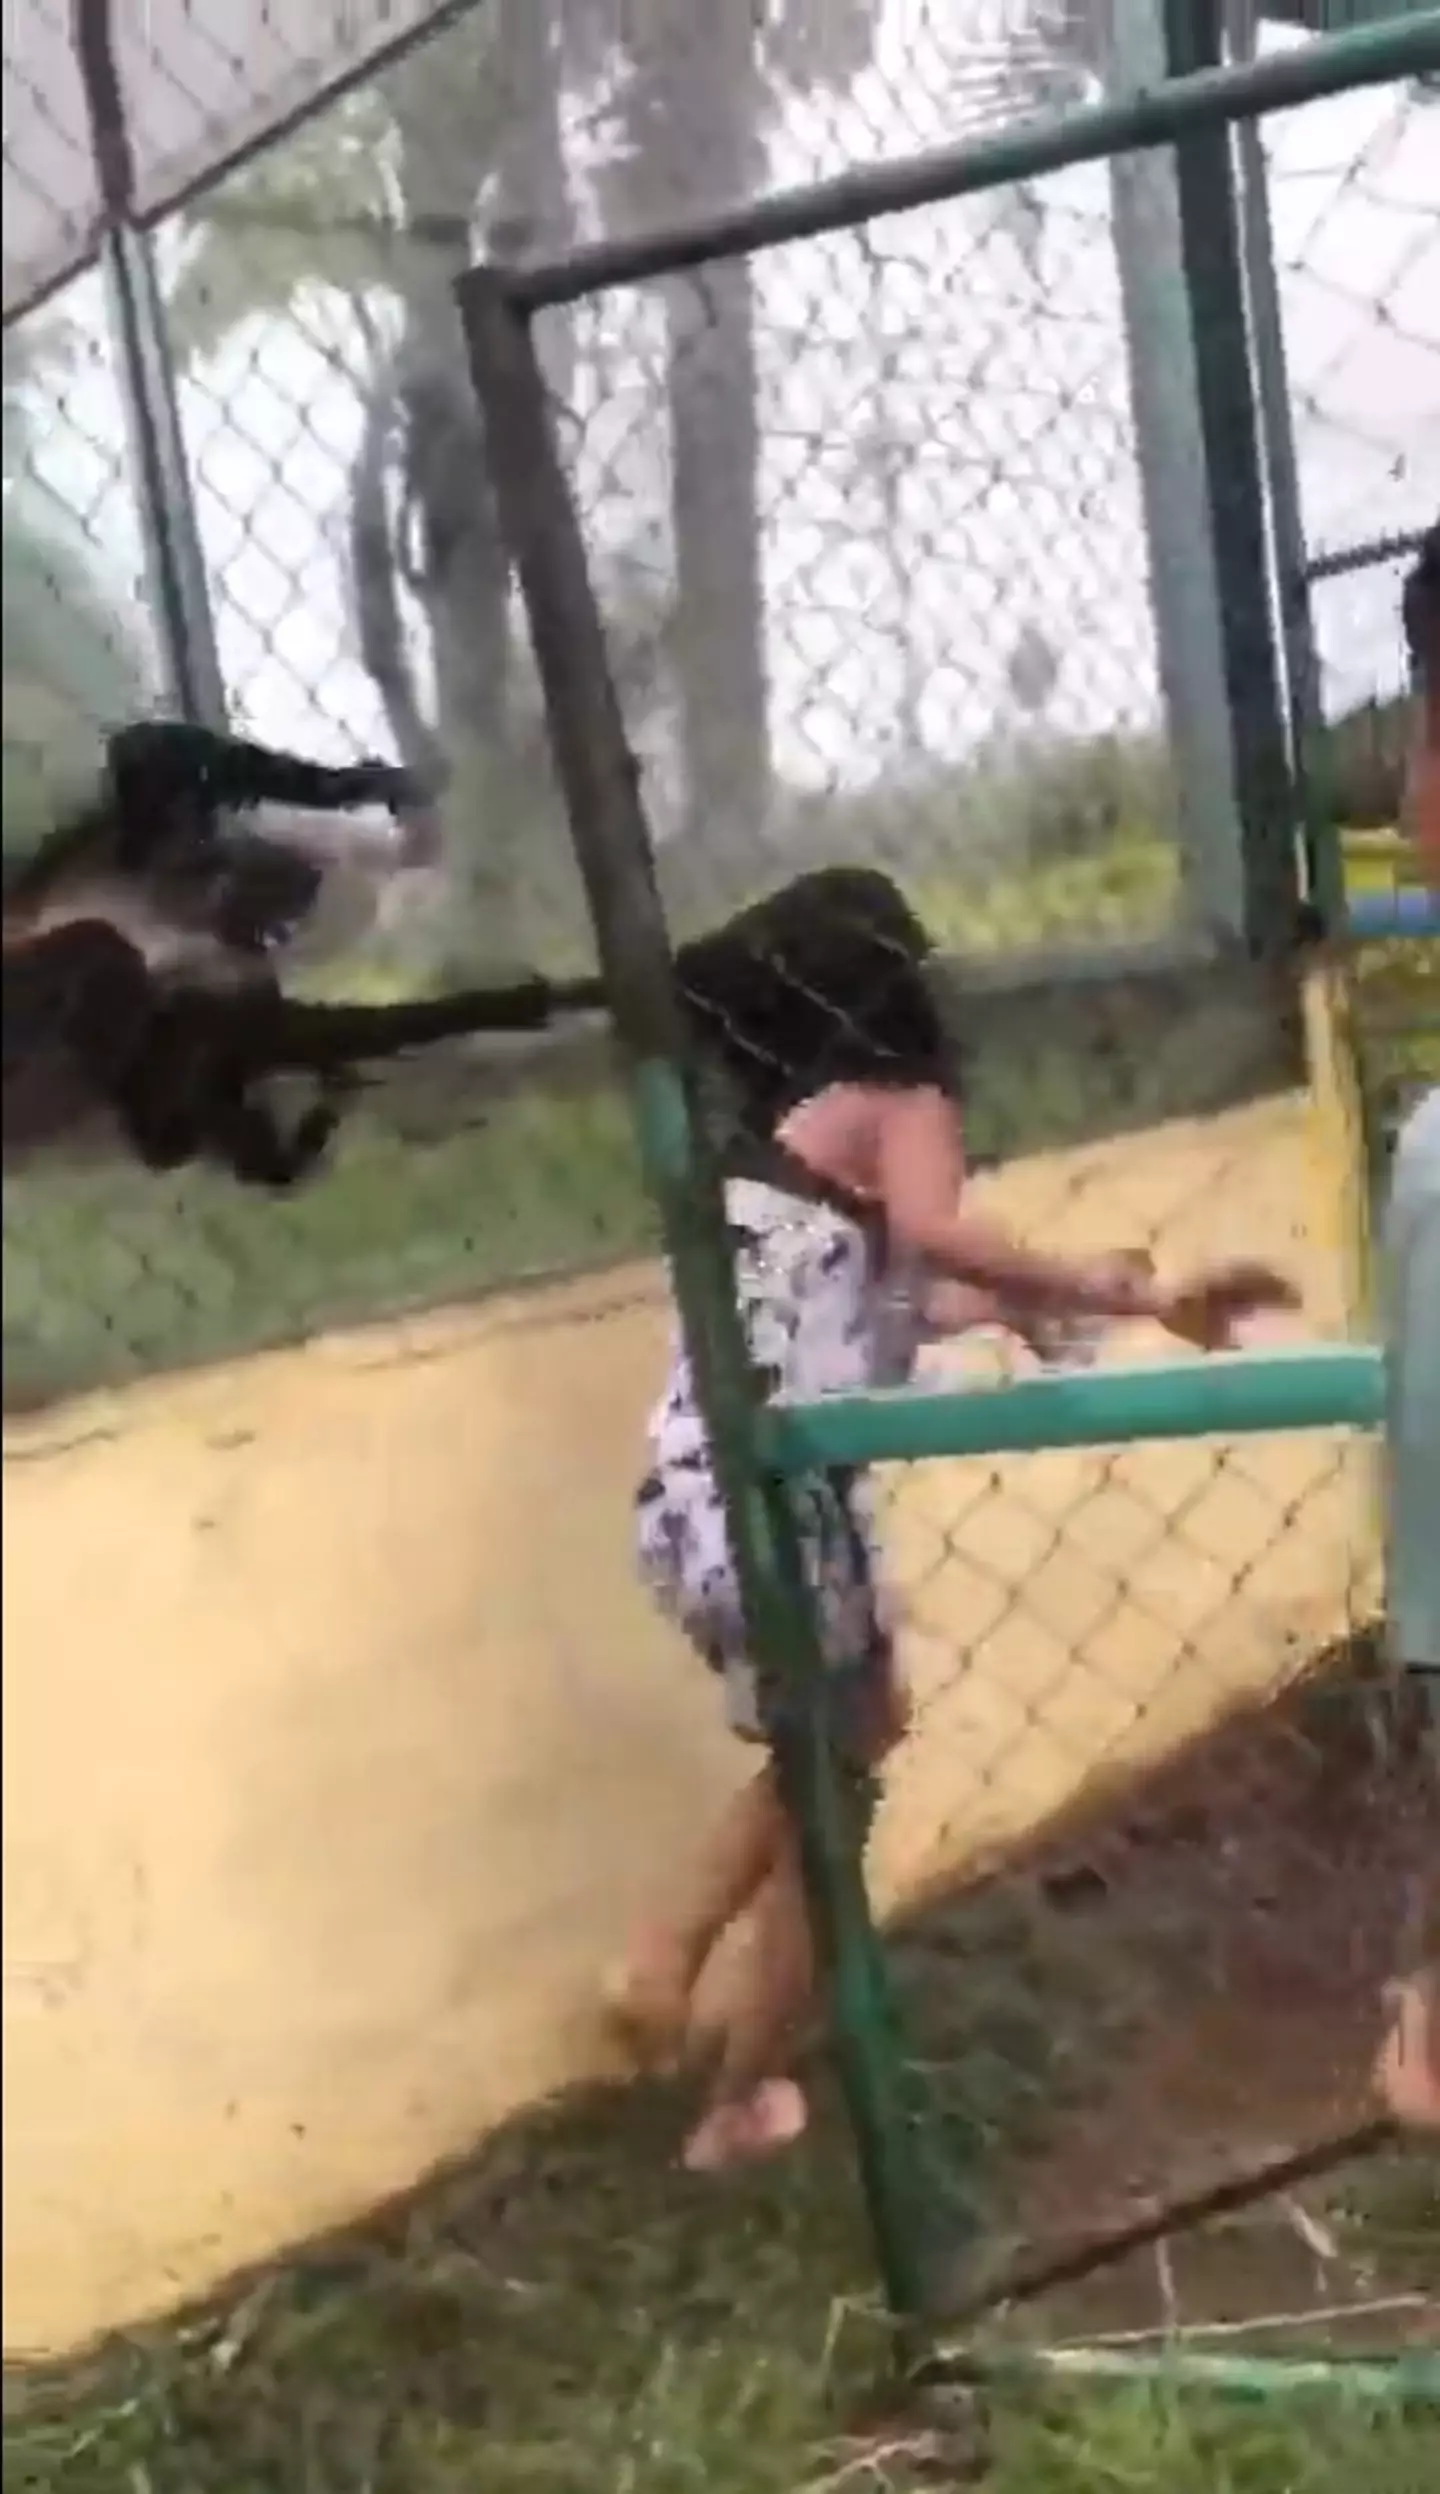 The monkeys were able to grab the girl again as she walked past their enclosure.